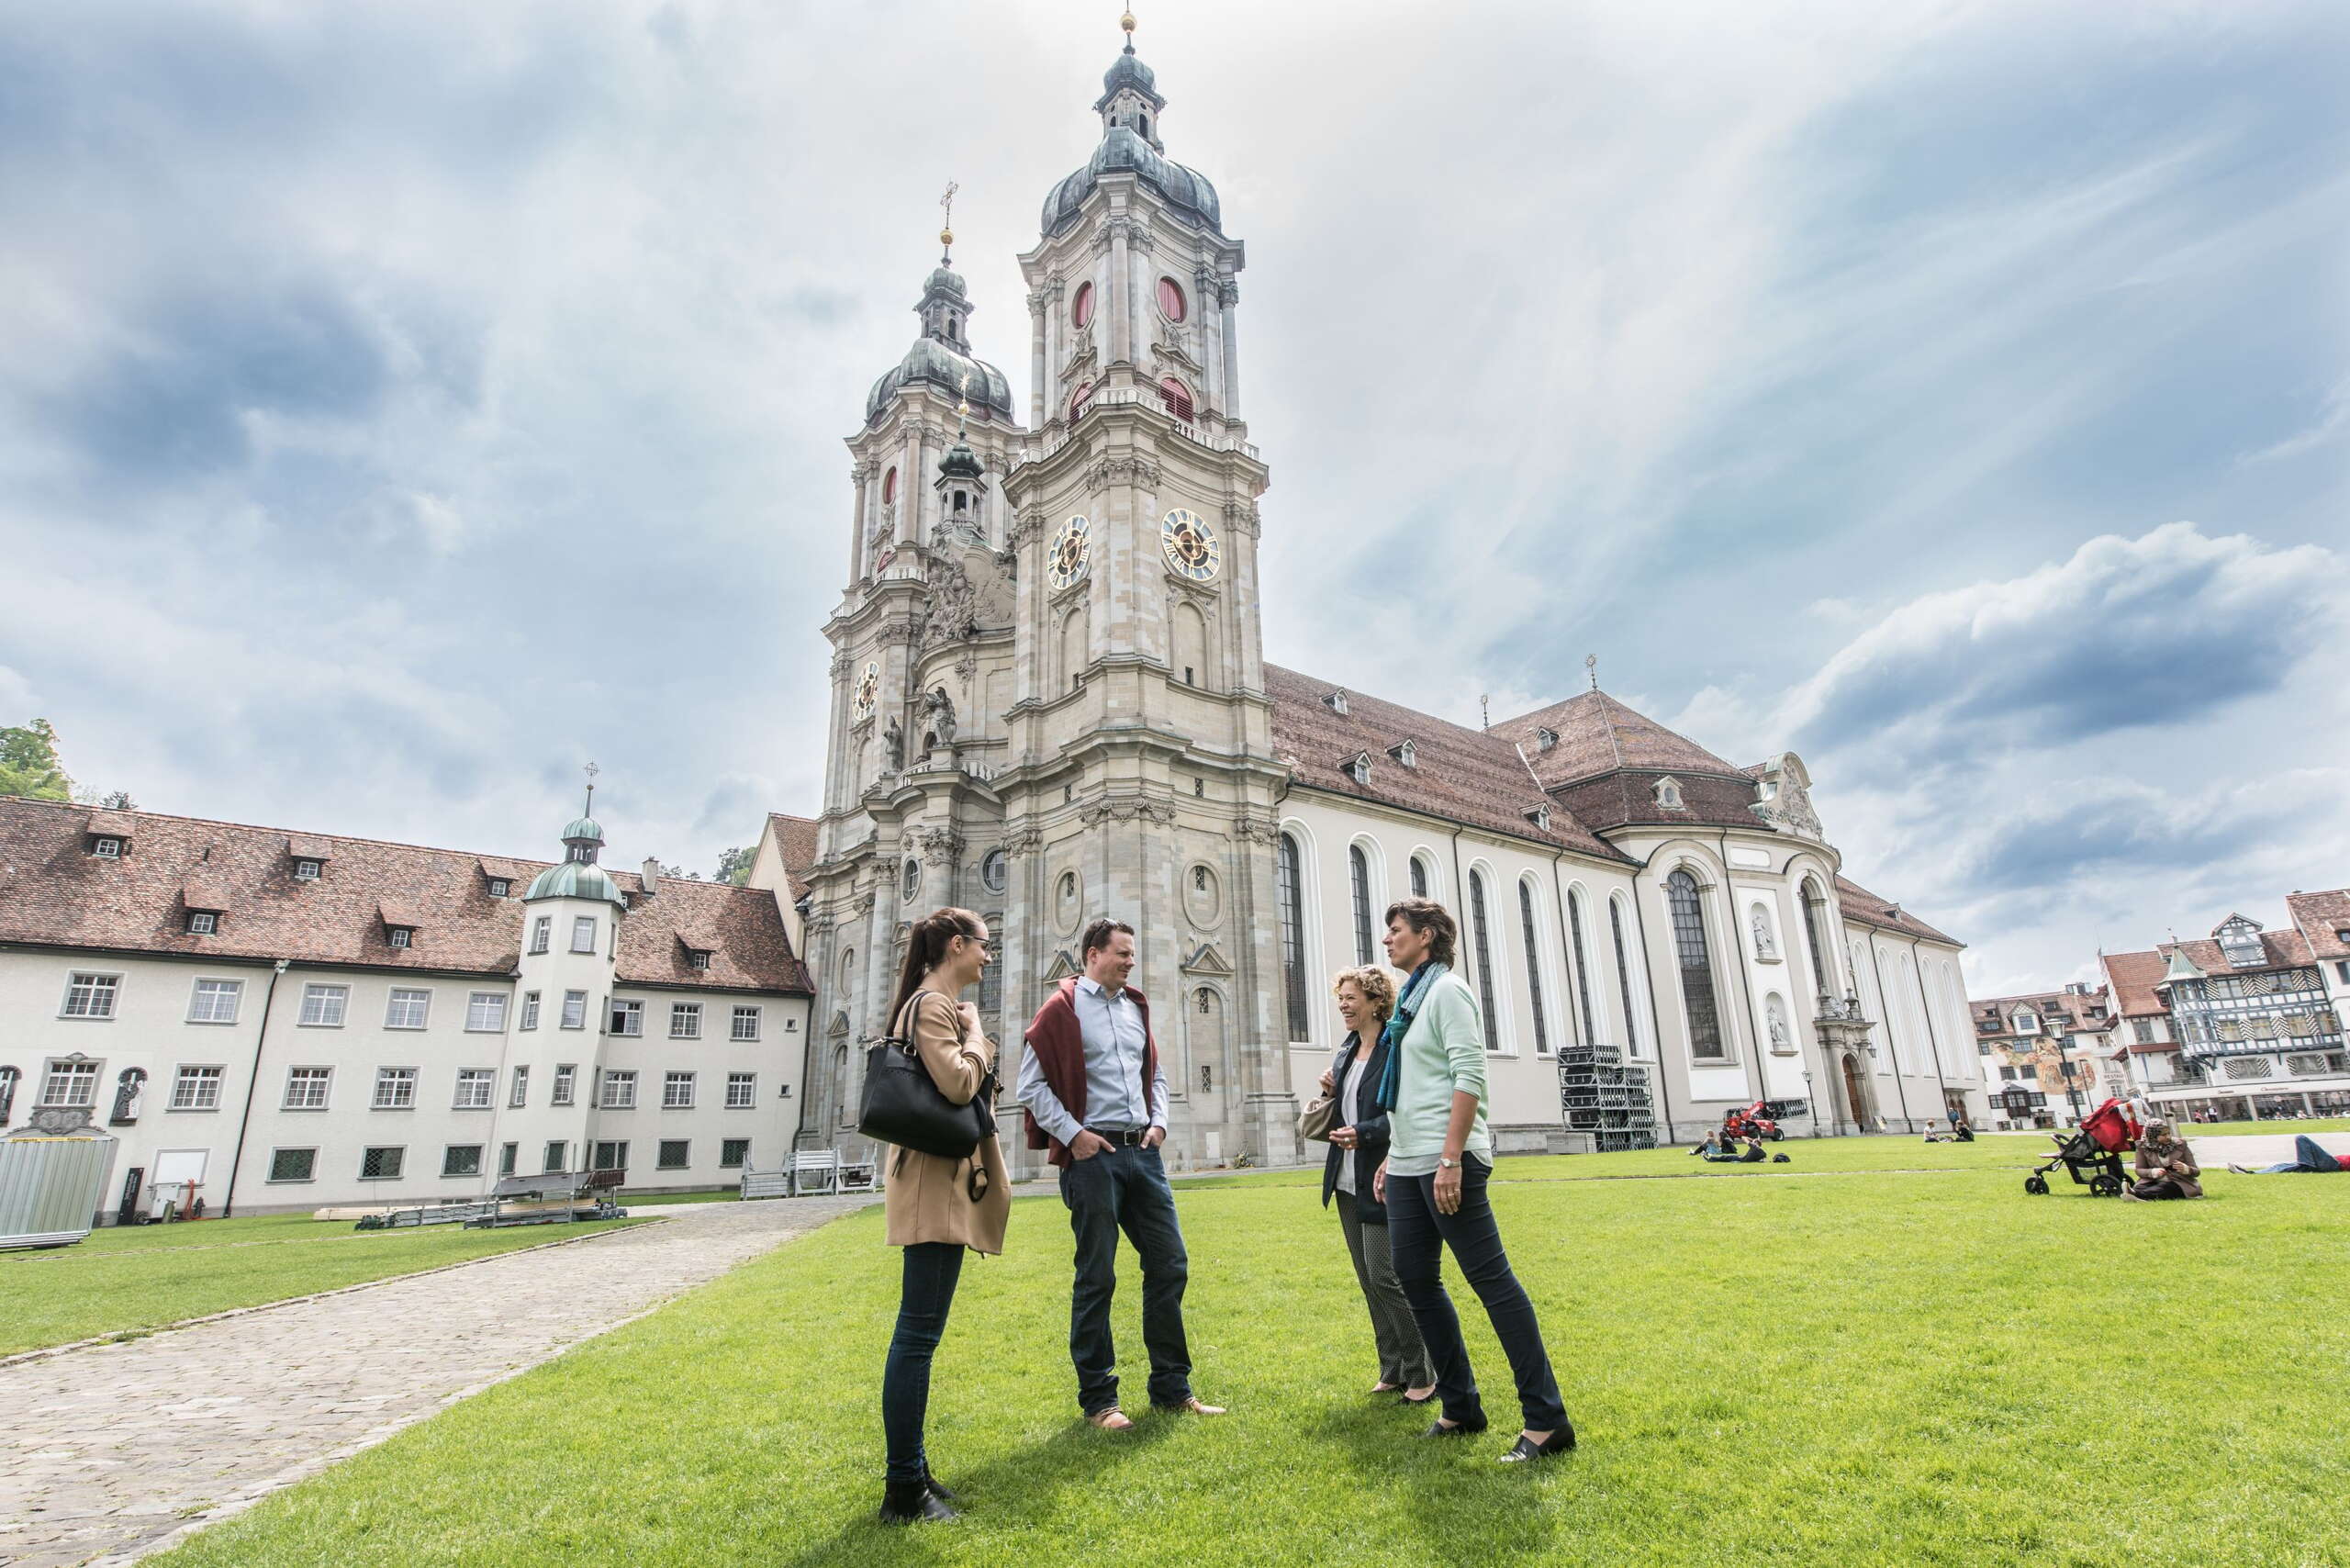 Four people standing on the Klosterplatz with the St.Gallen cathedral in the background